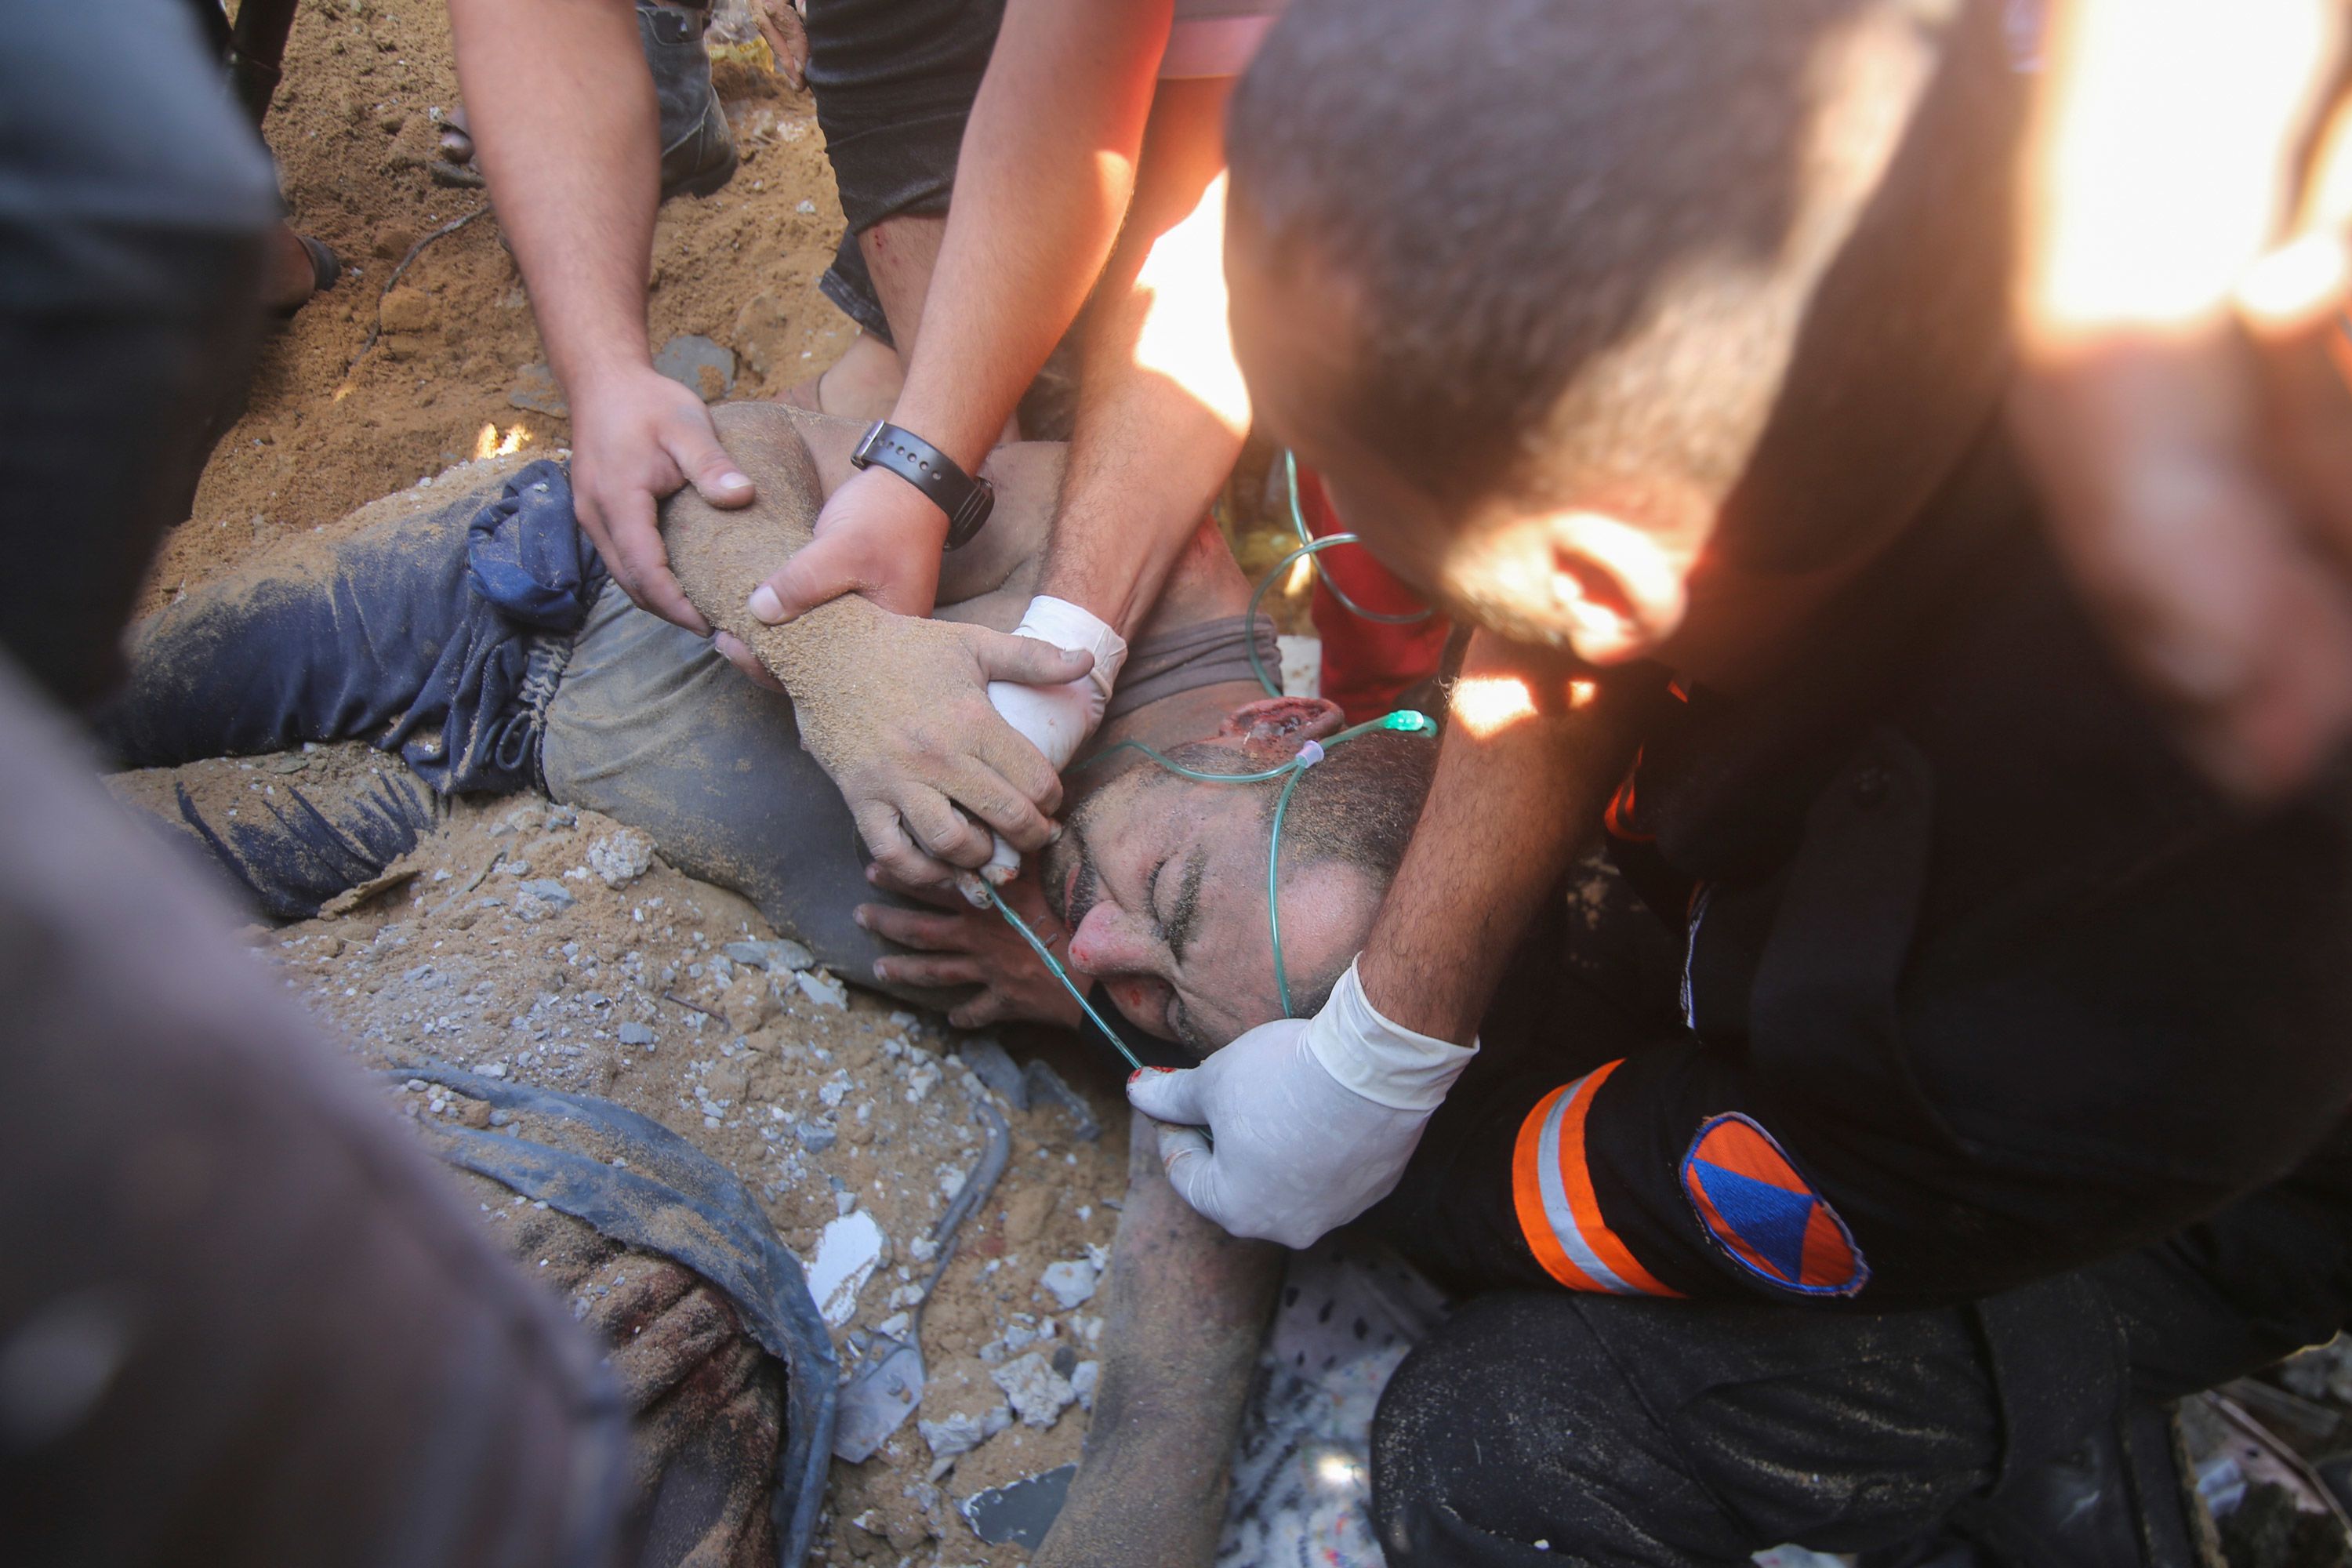 Palestinians rescue a wounded man from the rubble of a destroyed building following an Israeli airstrike in Rafah, Gaza, on October 13.